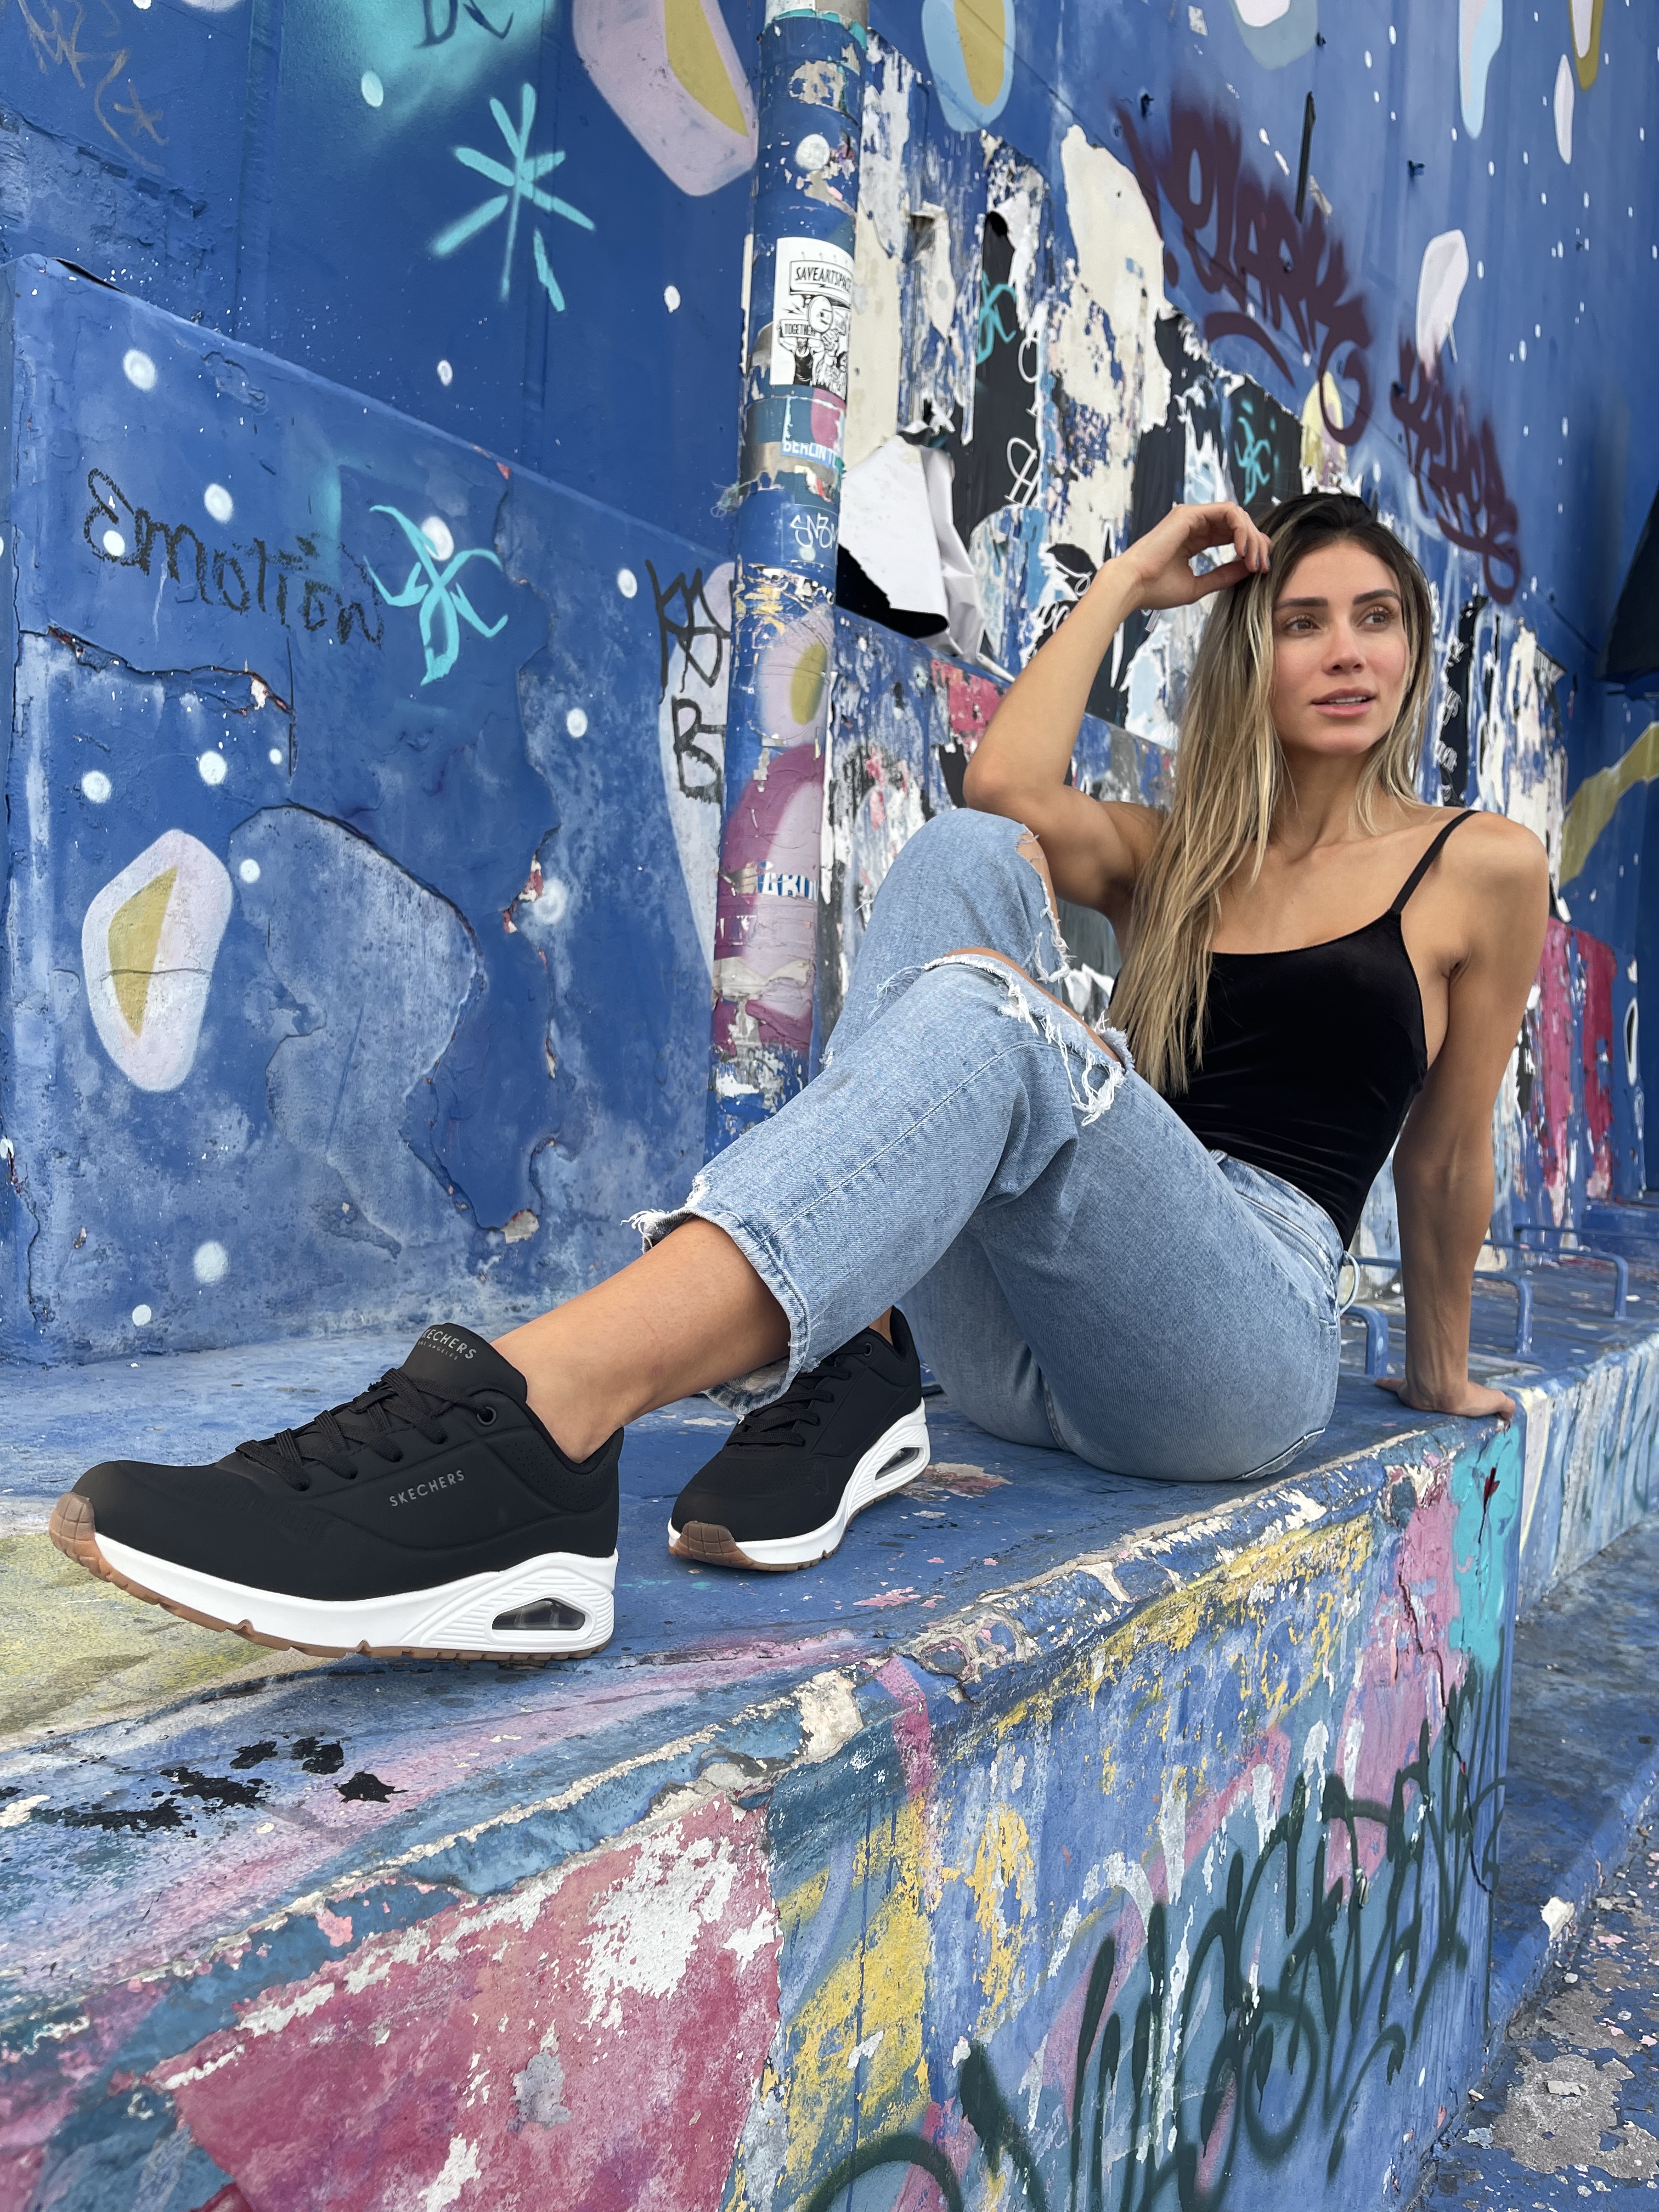 Omitir patio Hermana Skechers Kenya on Twitter: "Skechers Uno got that smooth clean  leather-textured synthetic upper with Air-Cooled Memory Foam insole  #fashion #skechers #skecherske @linacardona41 https://t.co/a1hfdz4t6U" /  Twitter